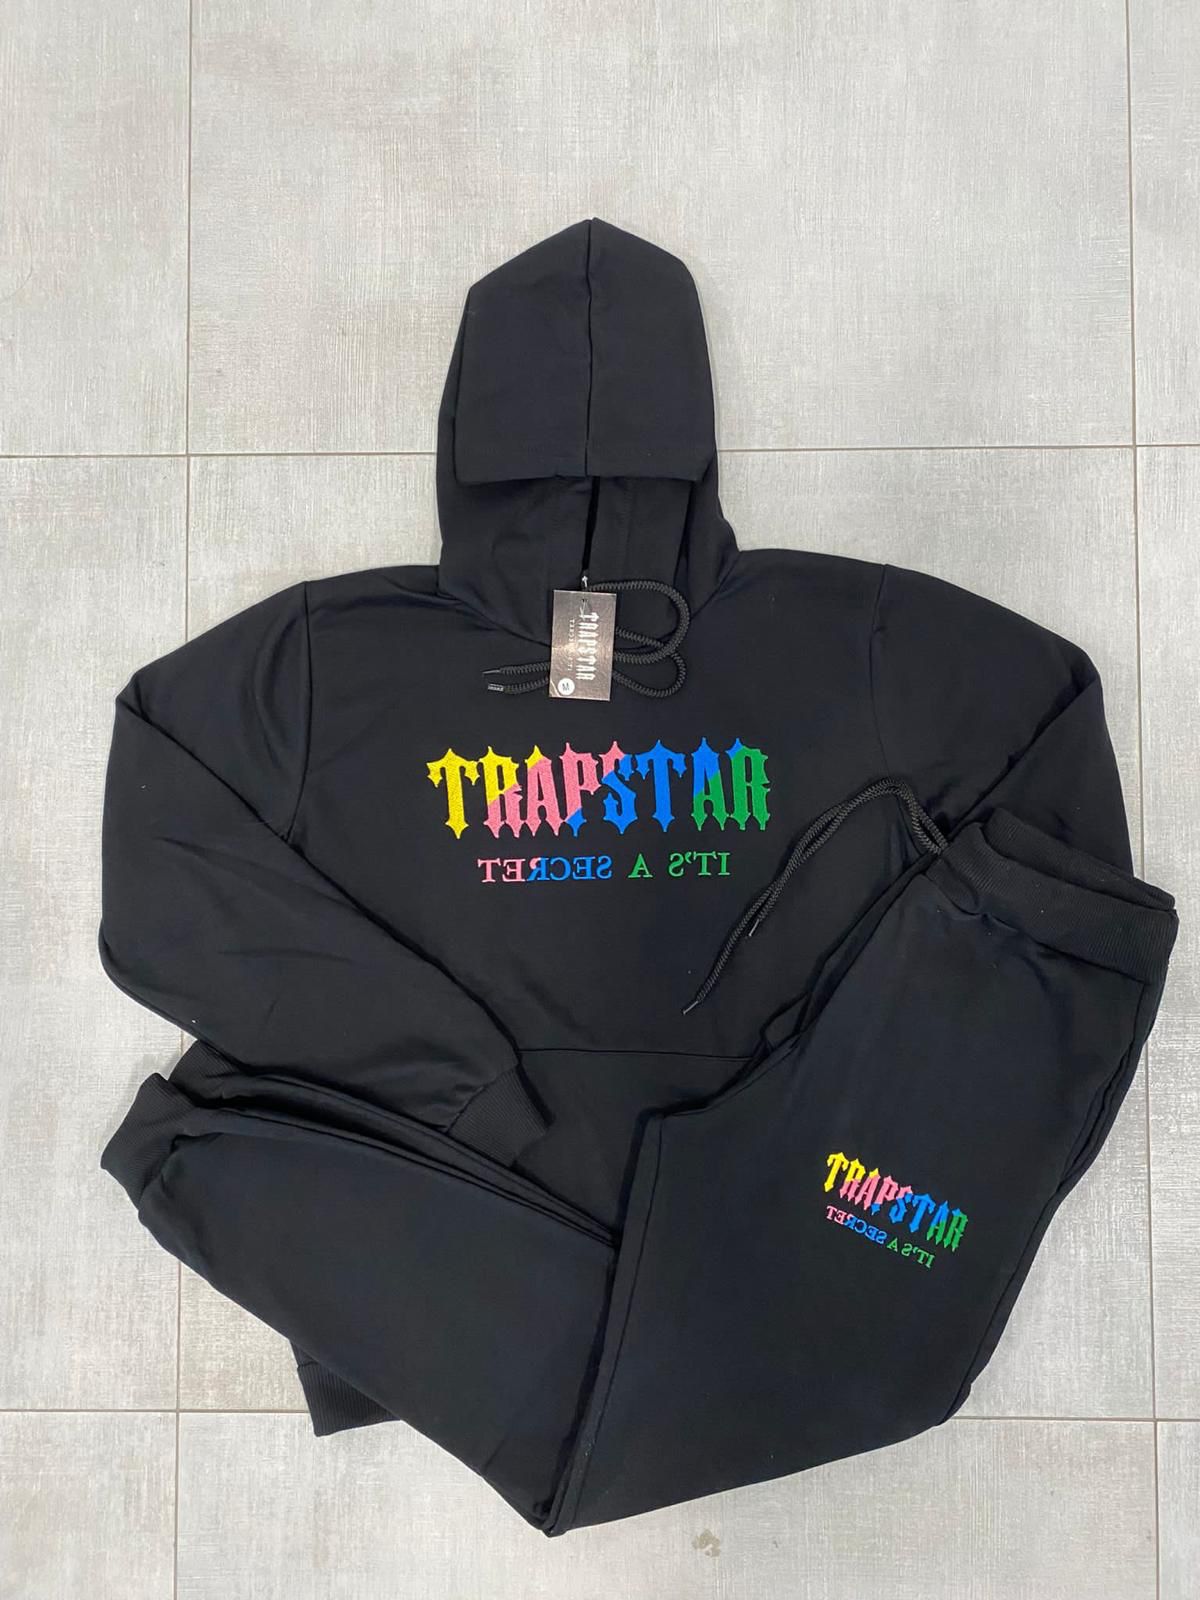 Trapstar embroidery